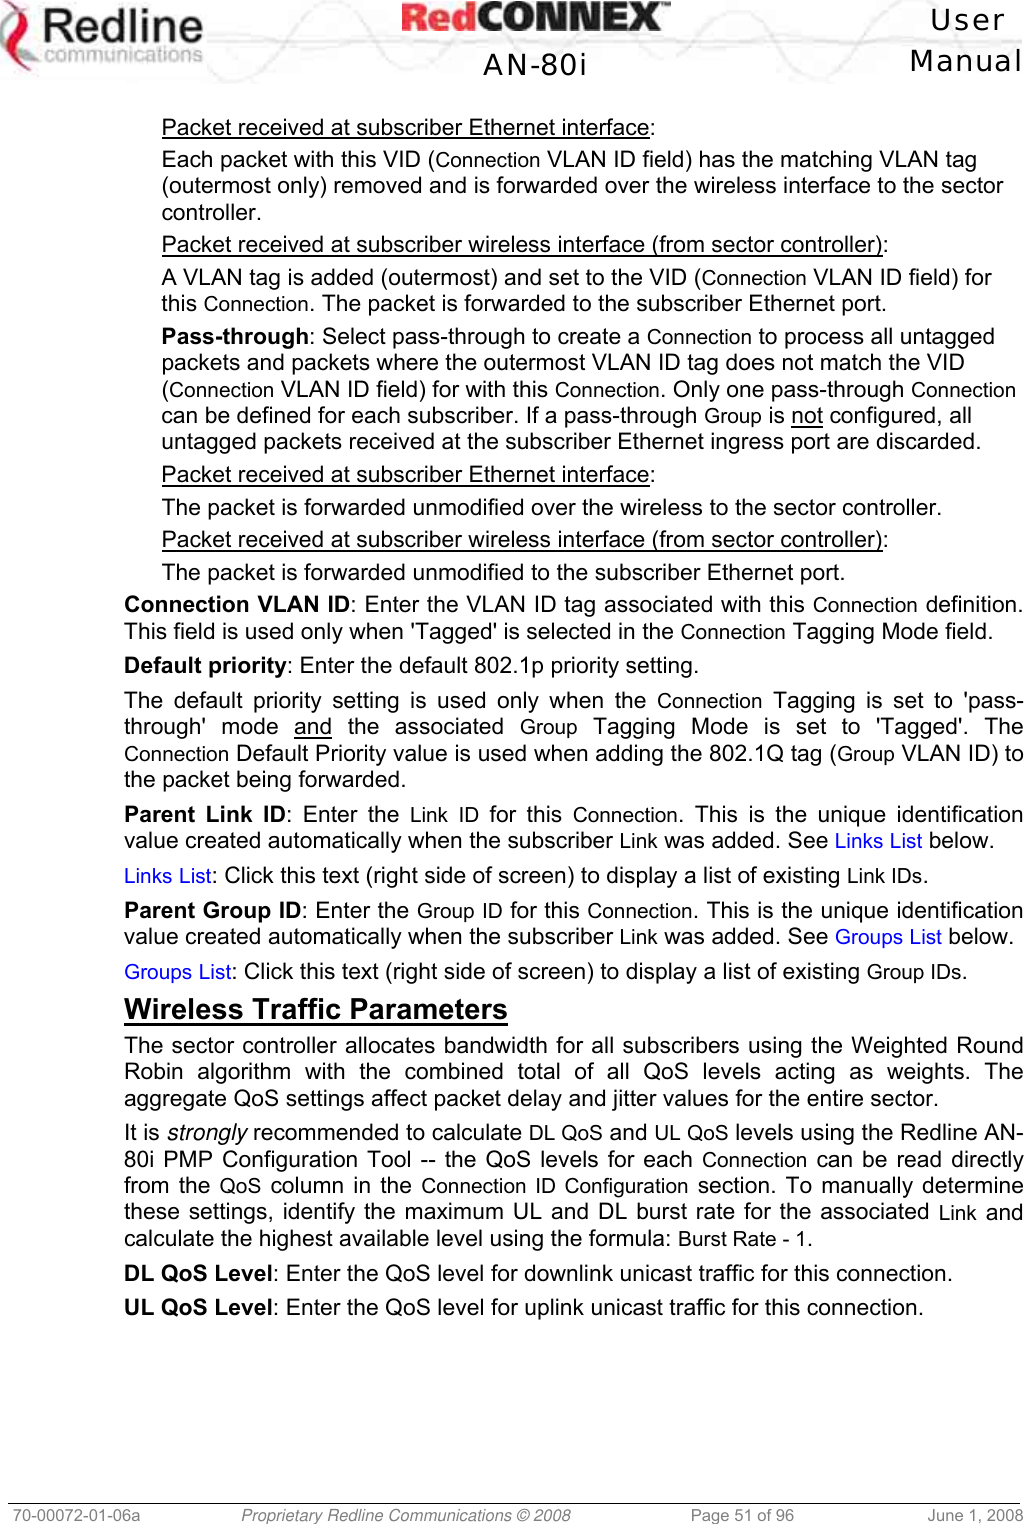   User  AN-80i Manual  70-00072-01-06a  Proprietary Redline Communications © 2008  Page 51 of 96  June 1, 2008  Packet received at subscriber Ethernet interface: Each packet with this VID (Connection VLAN ID field) has the matching VLAN tag (outermost only) removed and is forwarded over the wireless interface to the sector controller.  Packet received at subscriber wireless interface (from sector controller): A VLAN tag is added (outermost) and set to the VID (Connection VLAN ID field) for this Connection. The packet is forwarded to the subscriber Ethernet port.  Pass-through: Select pass-through to create a Connection to process all untagged packets and packets where the outermost VLAN ID tag does not match the VID (Connection VLAN ID field) for with this Connection. Only one pass-through Connection can be defined for each subscriber. If a pass-through Group is not configured, all untagged packets received at the subscriber Ethernet ingress port are discarded. Packet received at subscriber Ethernet interface: The packet is forwarded unmodified over the wireless to the sector controller. Packet received at subscriber wireless interface (from sector controller): The packet is forwarded unmodified to the subscriber Ethernet port.  Connection VLAN ID: Enter the VLAN ID tag associated with this Connection definition. This field is used only when &apos;Tagged&apos; is selected in the Connection Tagging Mode field.  Default priority: Enter the default 802.1p priority setting. The default priority setting is used only when the Connection Tagging is set to &apos;pass-through&apos; mode and the associated Group Tagging Mode is set to &apos;Tagged&apos;. The Connection Default Priority value is used when adding the 802.1Q tag (Group VLAN ID) to the packet being forwarded. Parent Link ID: Enter the Link ID for this Connection. This is the unique identification value created automatically when the subscriber Link was added. See Links List below. Links List: Click this text (right side of screen) to display a list of existing Link IDs. Parent Group ID: Enter the Group ID for this Connection. This is the unique identification value created automatically when the subscriber Link was added. See Groups List below. Groups List: Click this text (right side of screen) to display a list of existing Group IDs. Wireless Traffic Parameters The sector controller allocates bandwidth for all subscribers using the Weighted Round Robin algorithm with the combined total of all QoS levels acting as weights. The aggregate QoS settings affect packet delay and jitter values for the entire sector.  It is strongly recommended to calculate DL QoS and UL QoS levels using the Redline AN-80i PMP Configuration Tool -- the QoS levels for each Connection can be read directly from the QoS column in the Connection ID Configuration section. To manually determine these settings, identify the maximum UL and DL burst rate for the associated Link and calculate the highest available level using the formula: Burst Rate - 1. DL QoS Level: Enter the QoS level for downlink unicast traffic for this connection.  UL QoS Level: Enter the QoS level for uplink unicast traffic for this connection. 